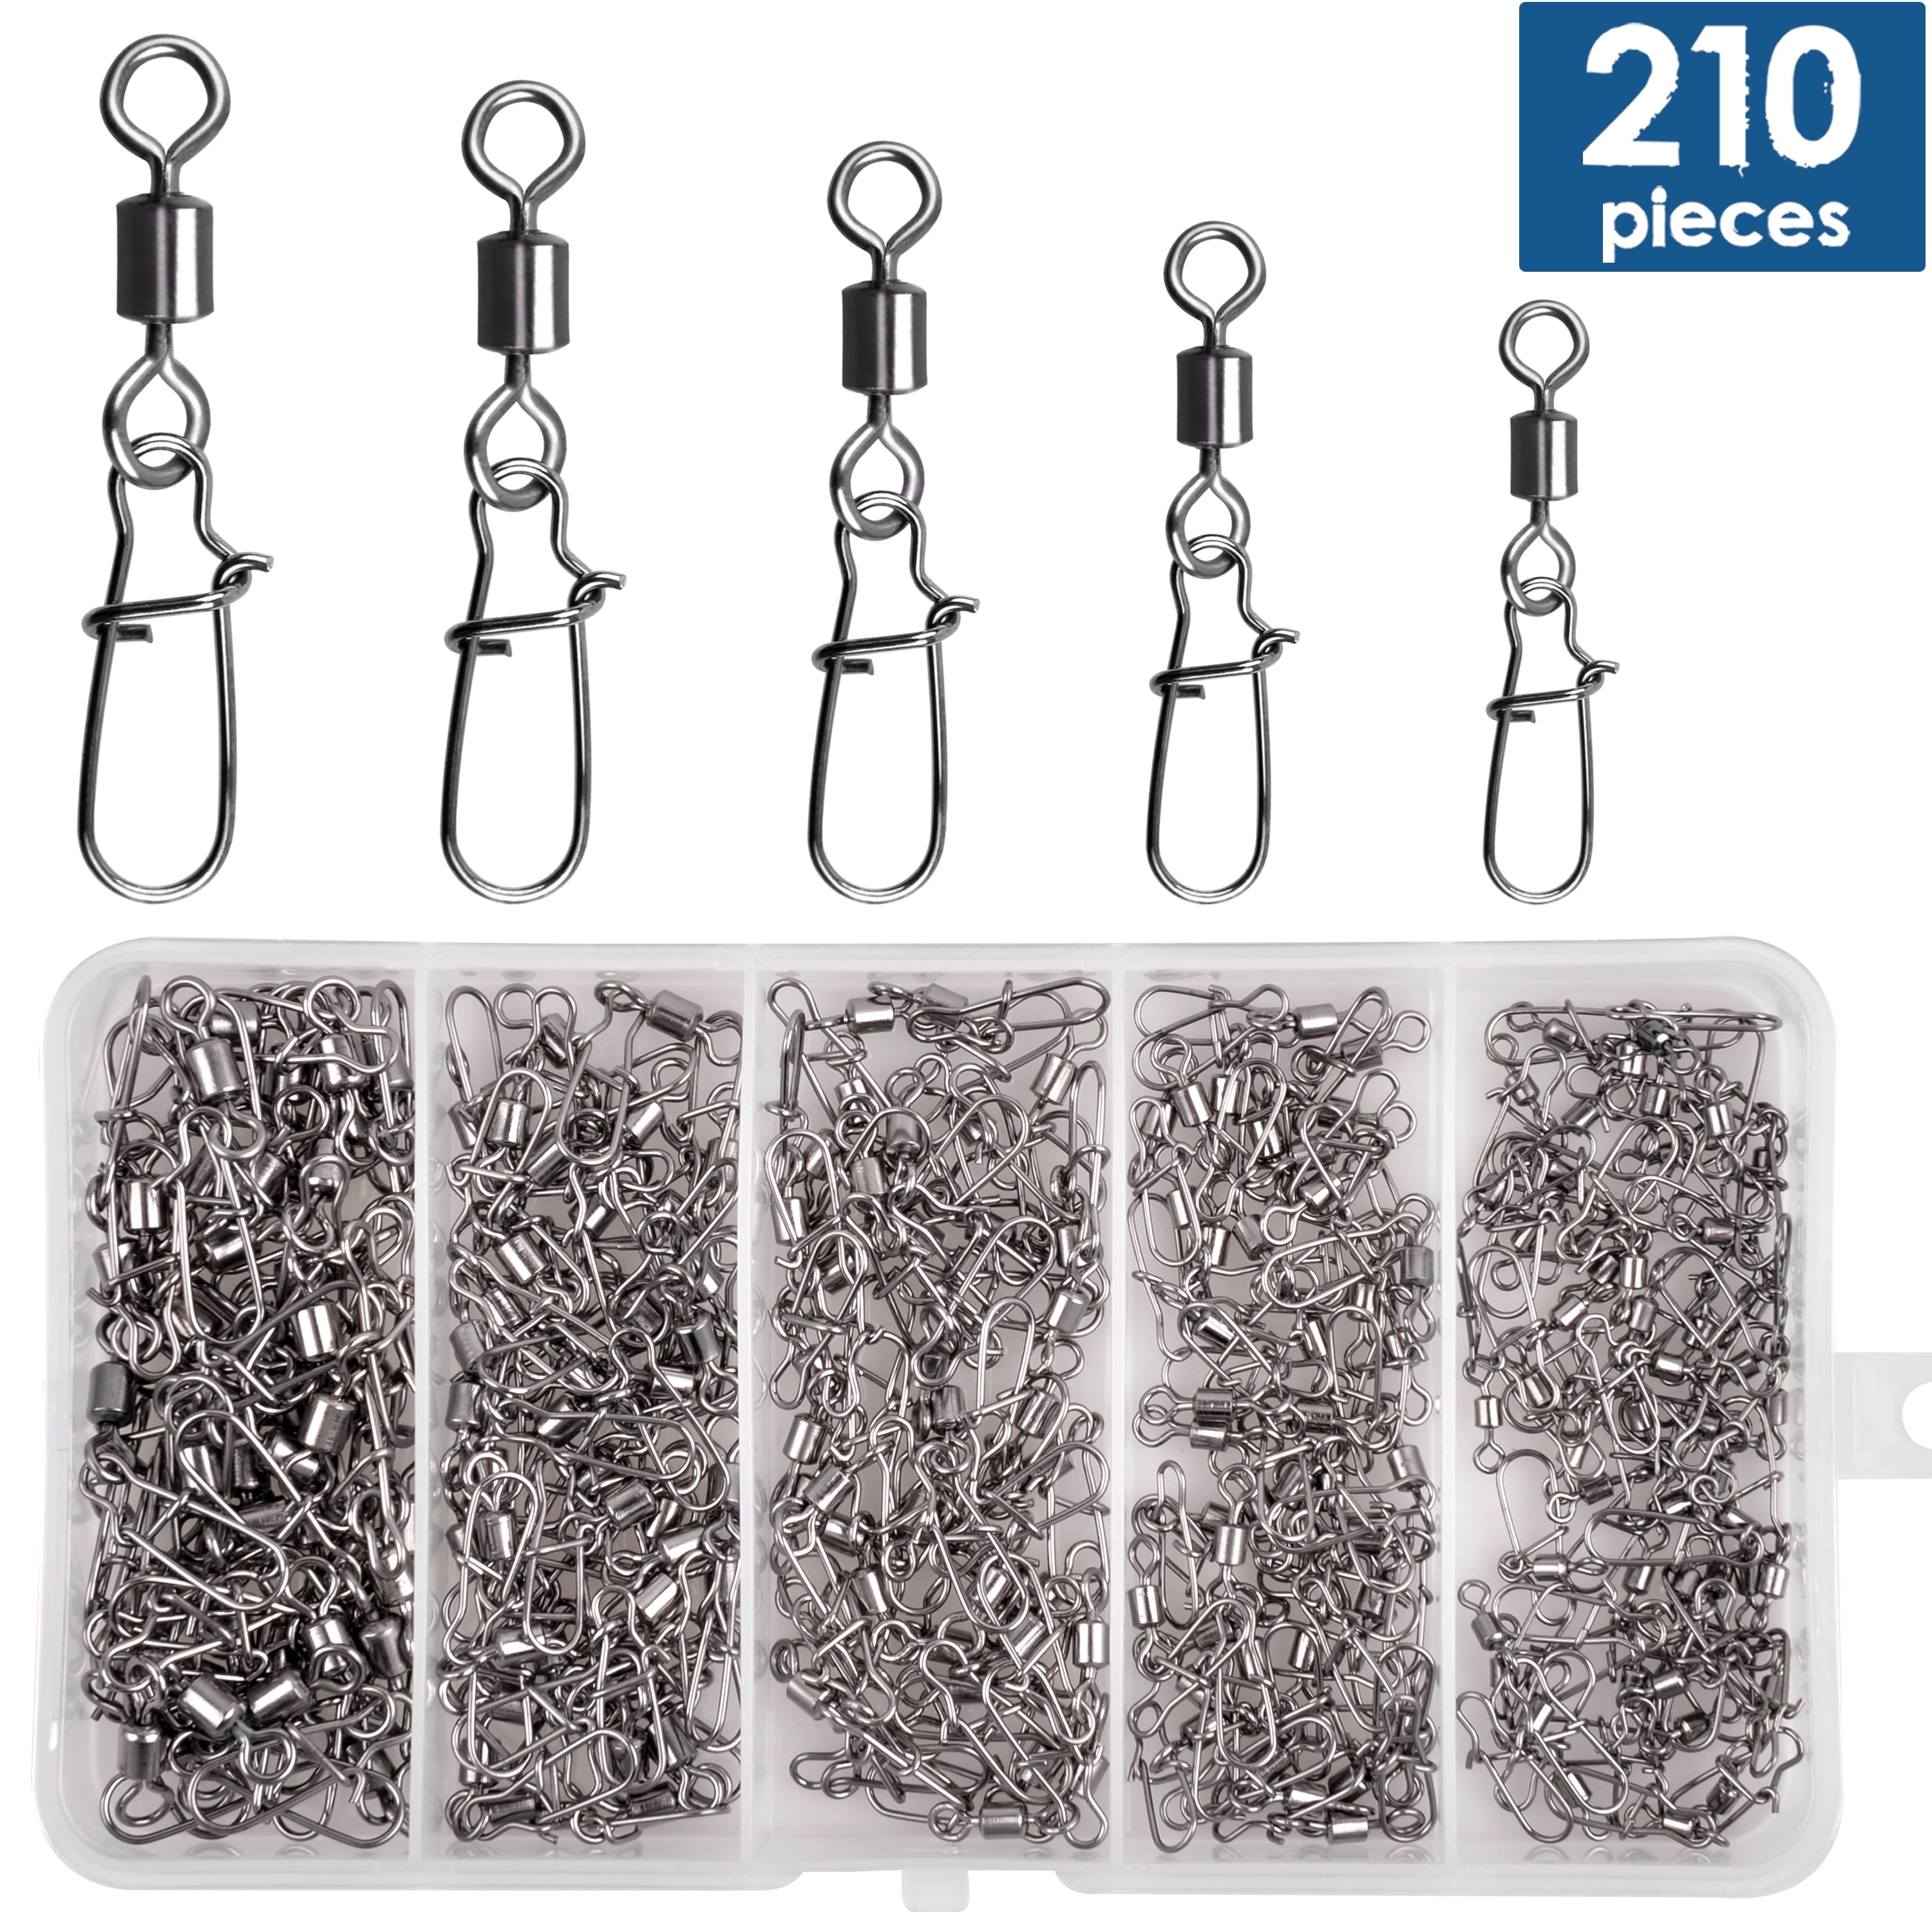 Fishing 210pieces/Box Fishing Swivel Snap Connectors Size 2 4 5 6